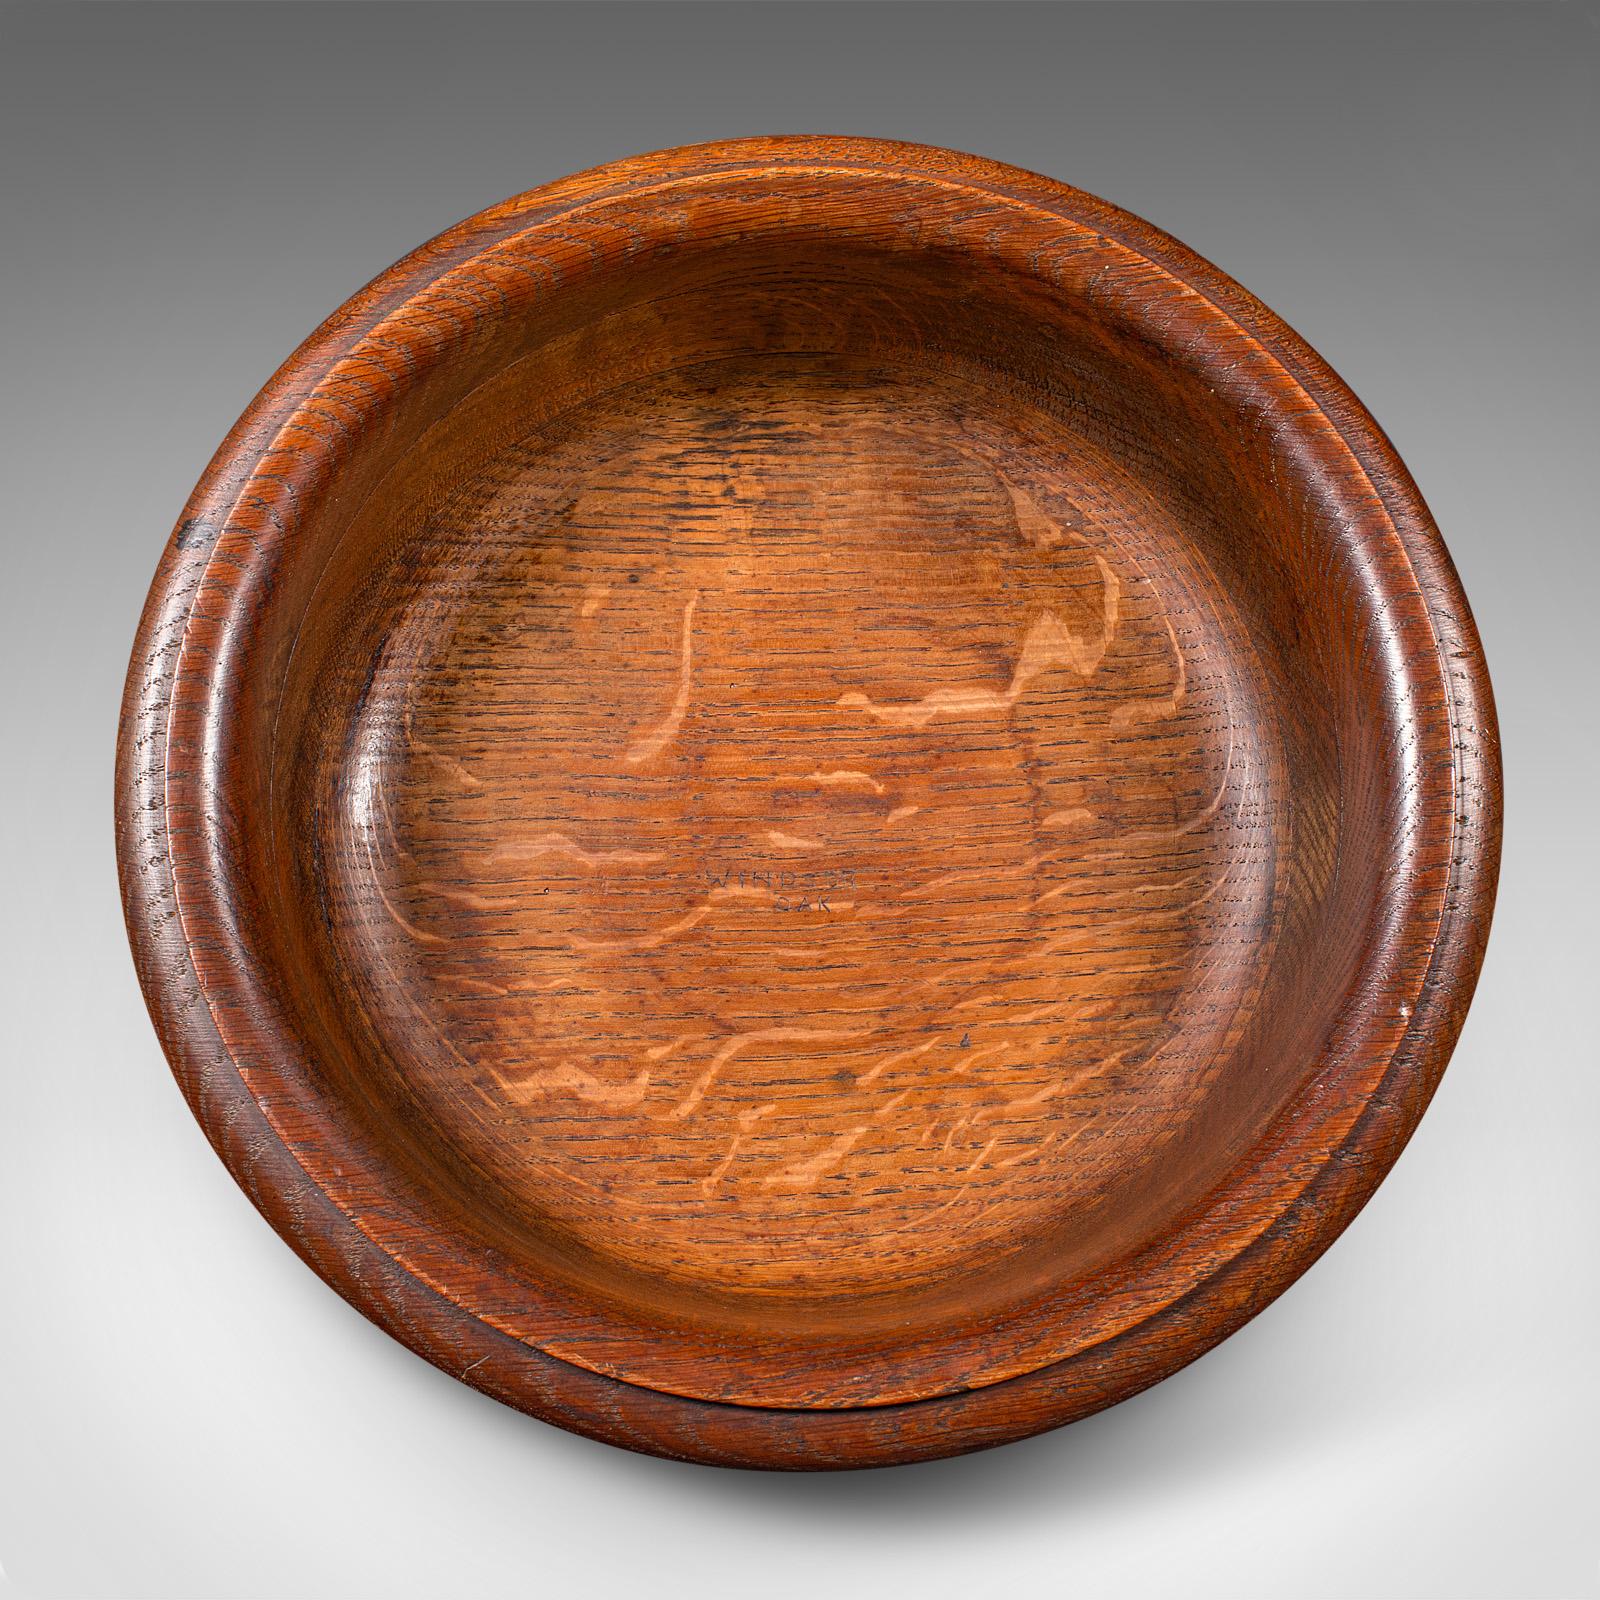 Antique Fruit Bowl, English, Turned Oak, Display Dish, Arts & Crafts, Victorian For Sale 2